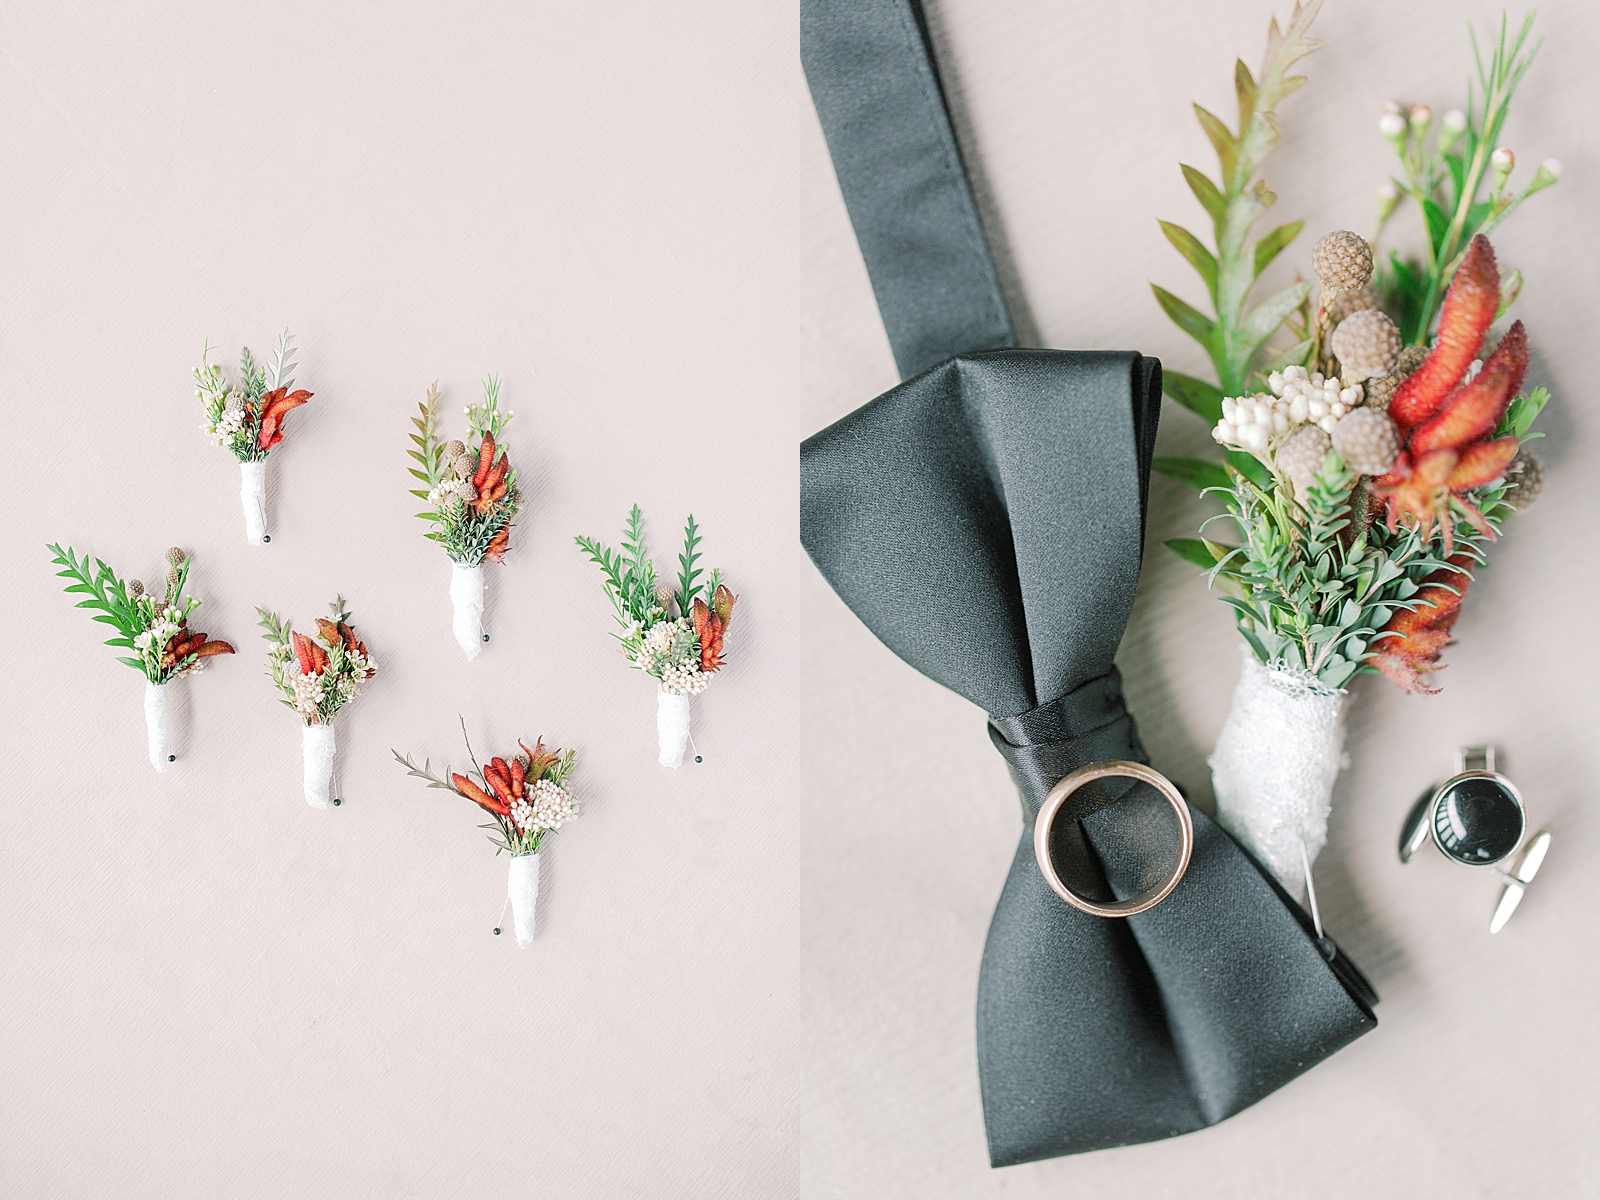 Hackney Warehouse Wedding Grooms Details Boutonnieres bowtie ring and cuff links Photos